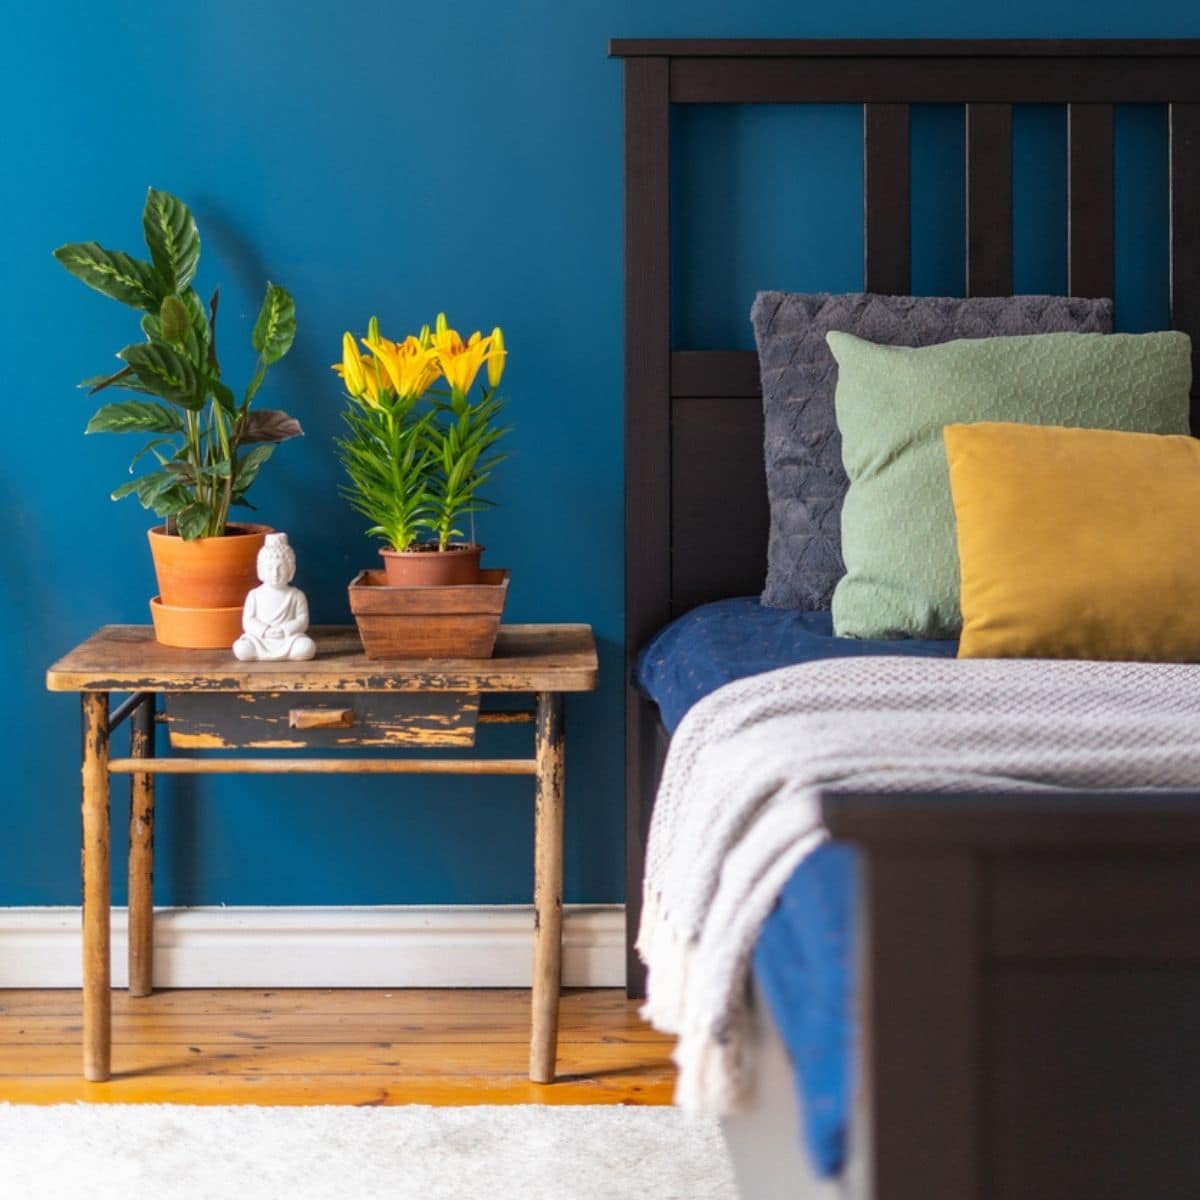 A teal bedroom with yellow flowers and pillow